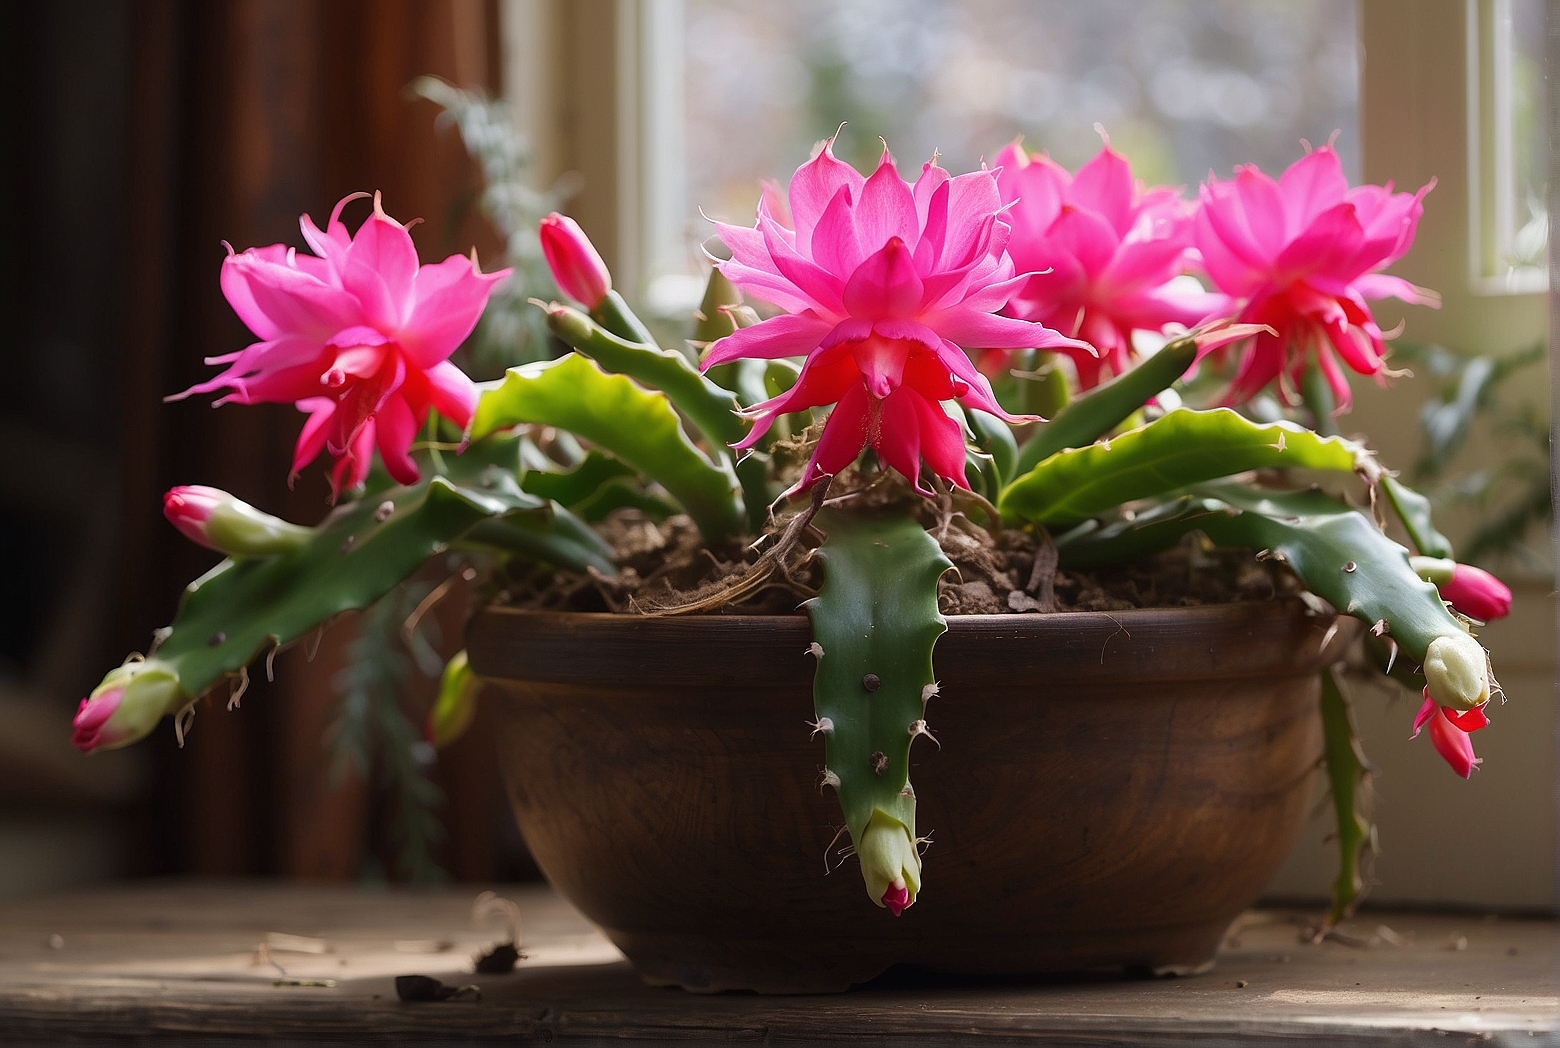 When is the natural blooming period for Christmas cactus